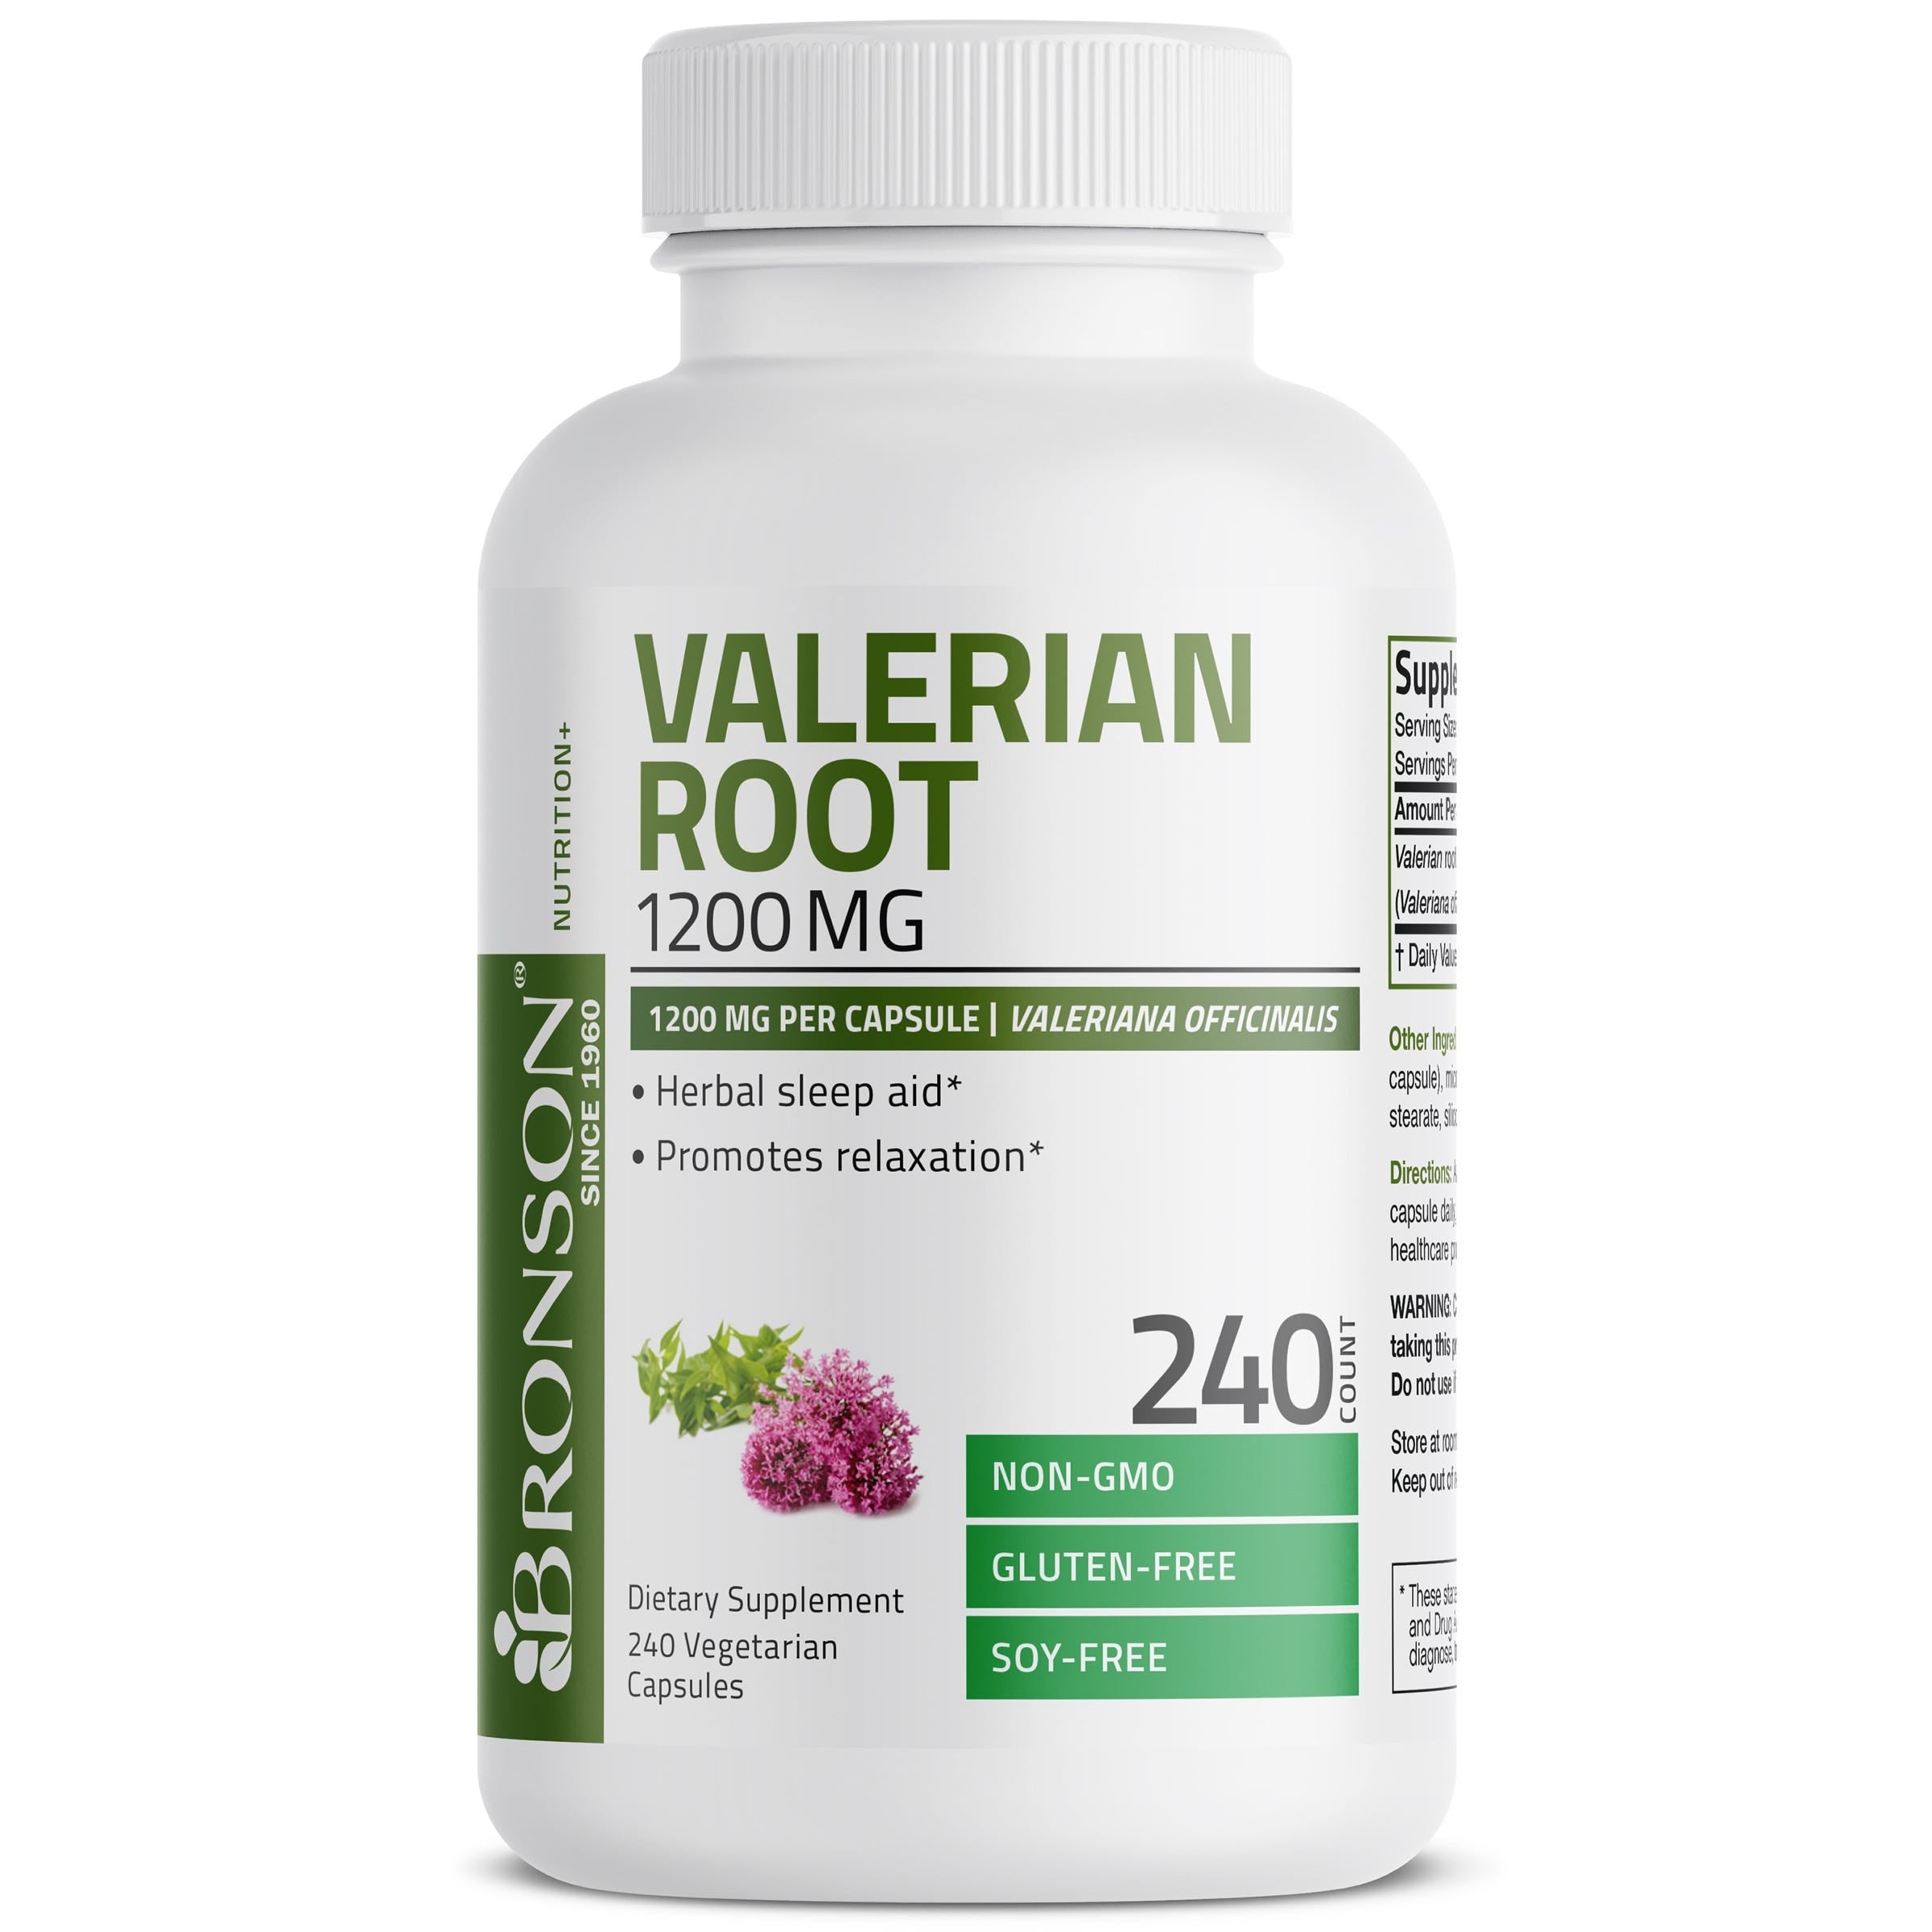 Valerian Root 1200 mg view 9 of 6